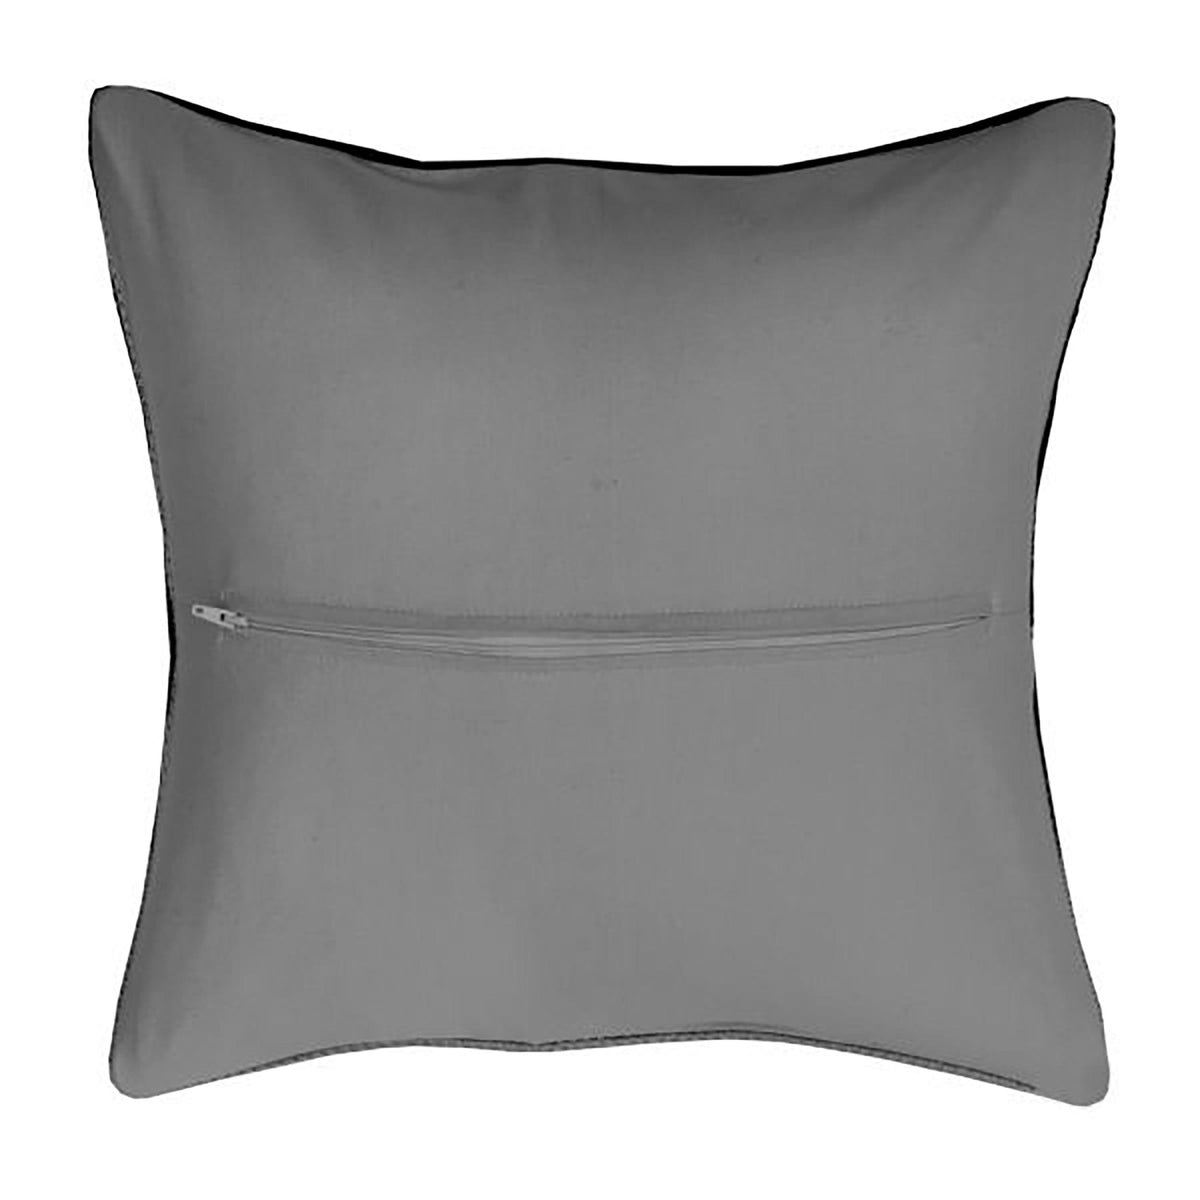 Thea Gouverneur Cushion Back Kit with Zipper - Grey - For any 16x16 Inch (40x40cm) Cushion- Cross Stitch Creations - Embroidery - 23.5903 - Thea Gouverneur Since 1959